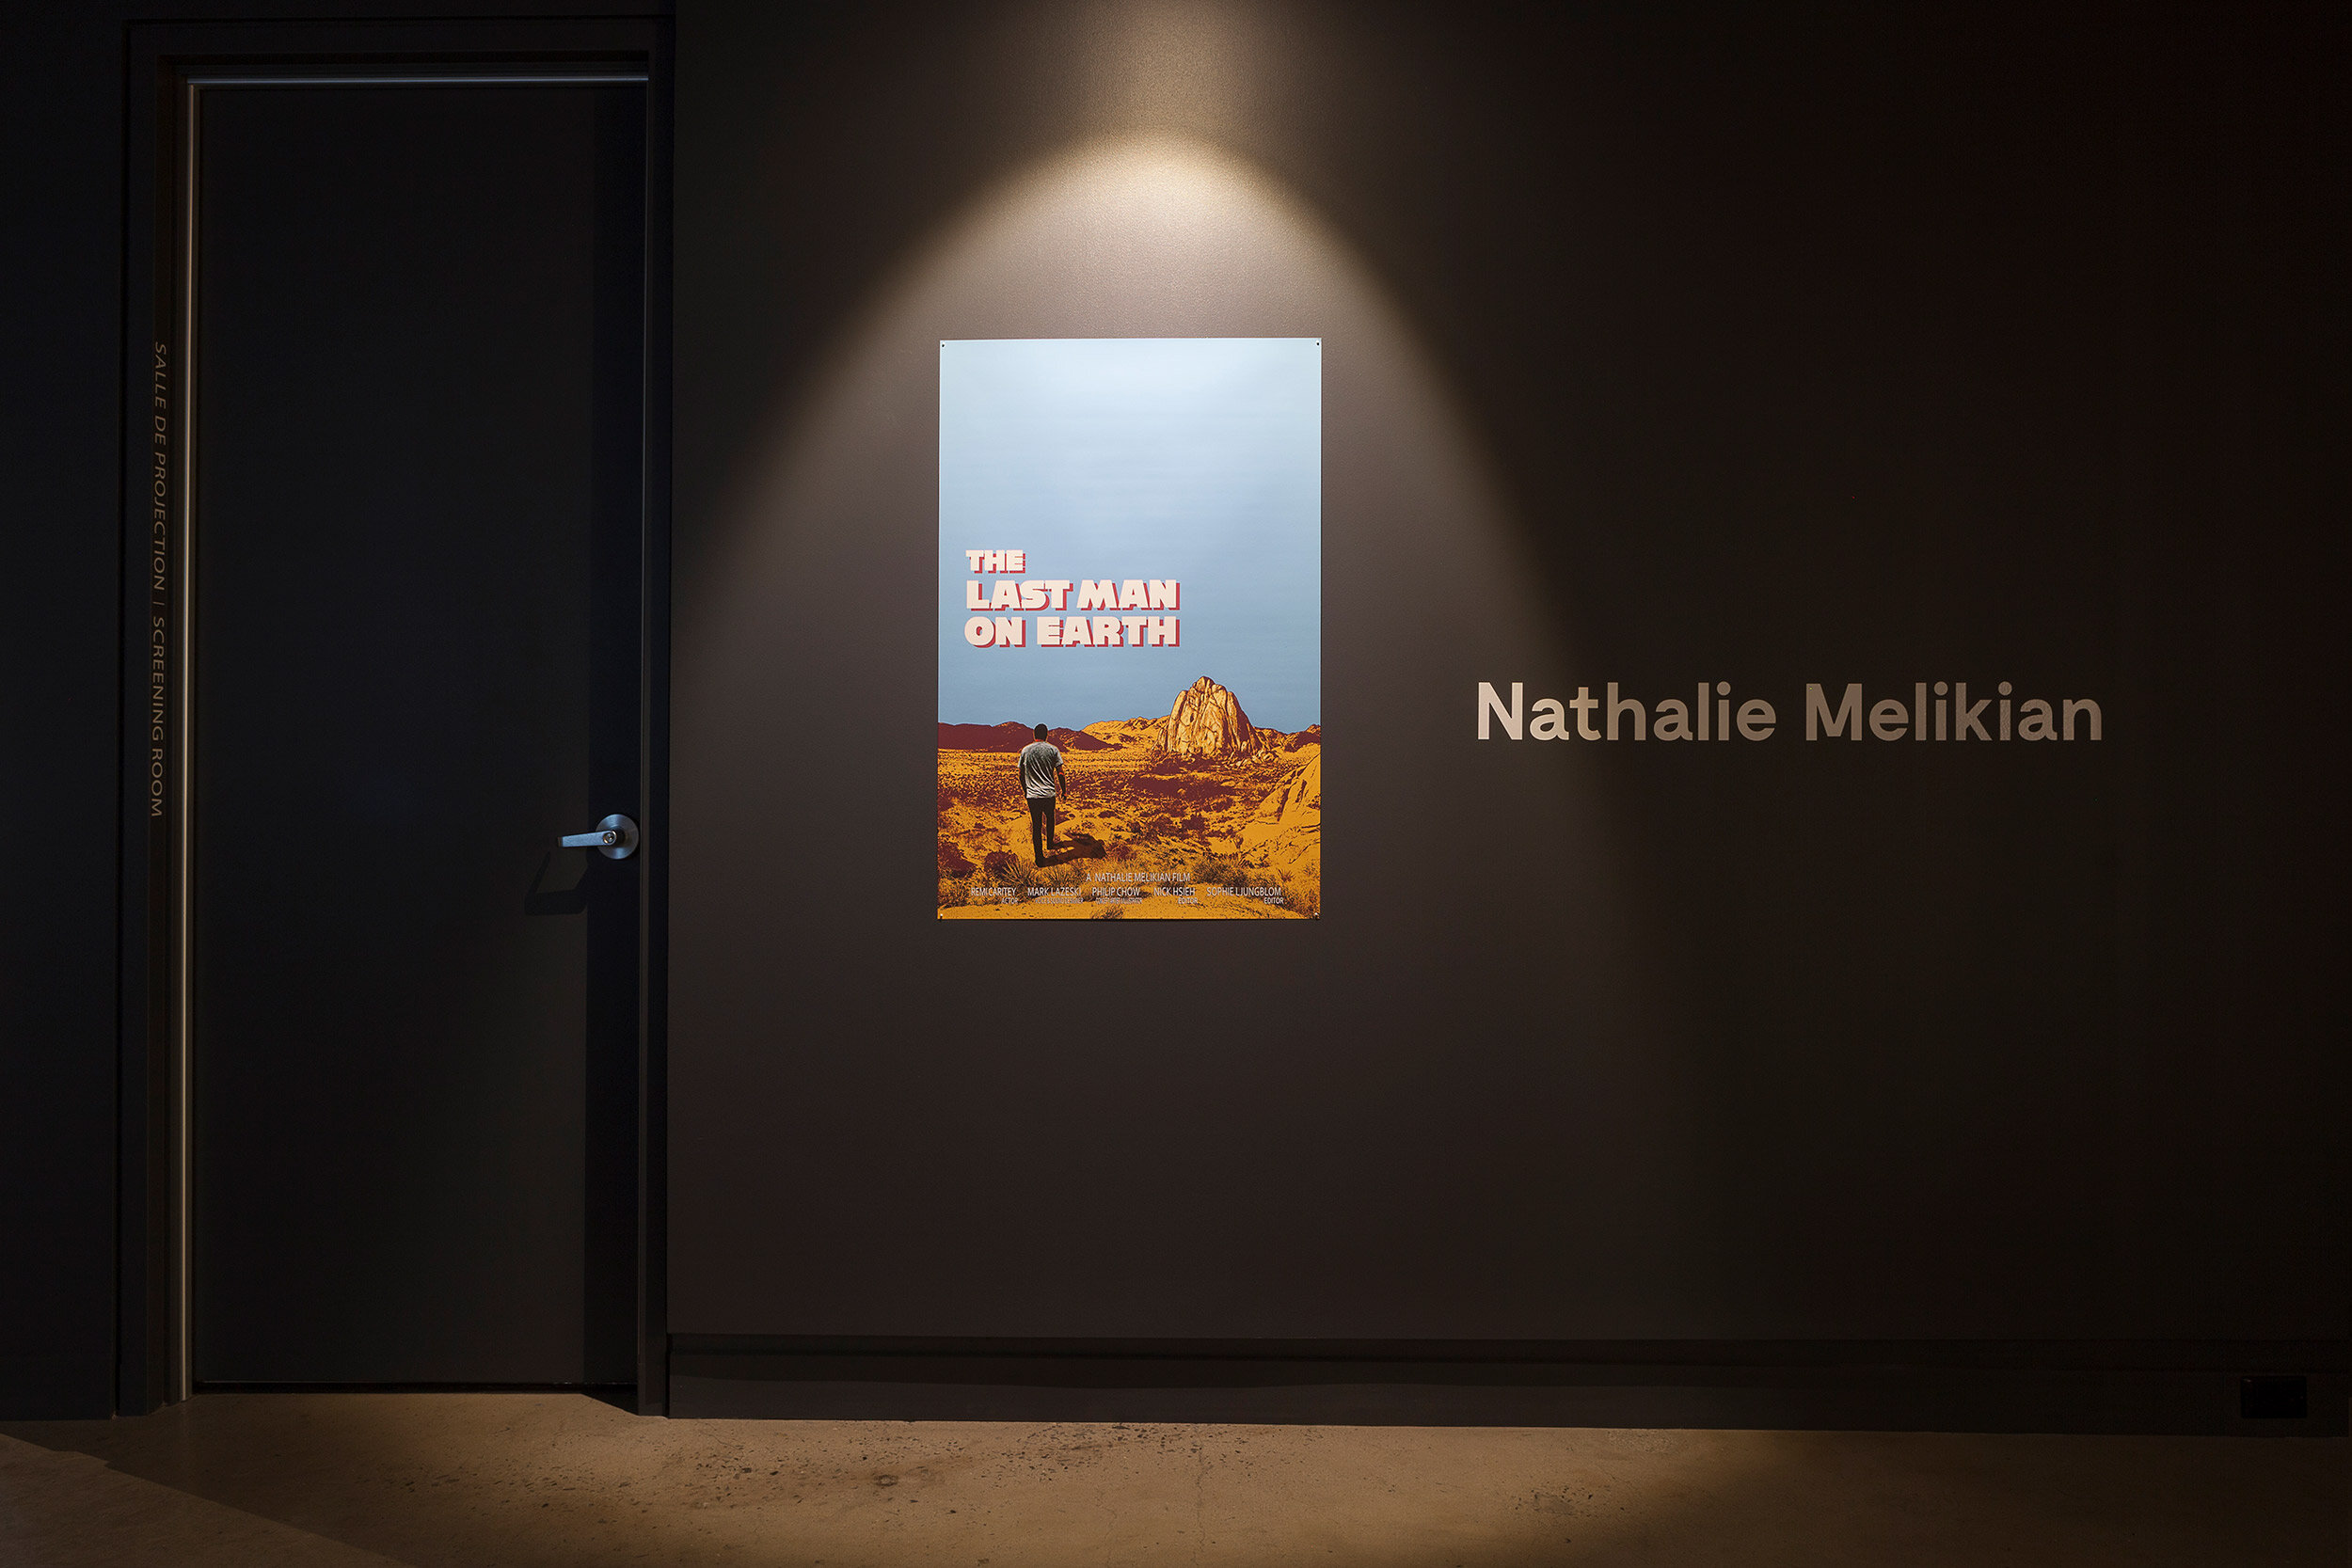  © Nathalie Melikian , The Last Man on Earth  (2016). Installation view of the exhibition, Dazibao, 2016-2017. BNLMTL 2016 –  The Grand Balcony  (curator: Philippe Pirotte). Photo: Marilou Crispin. 